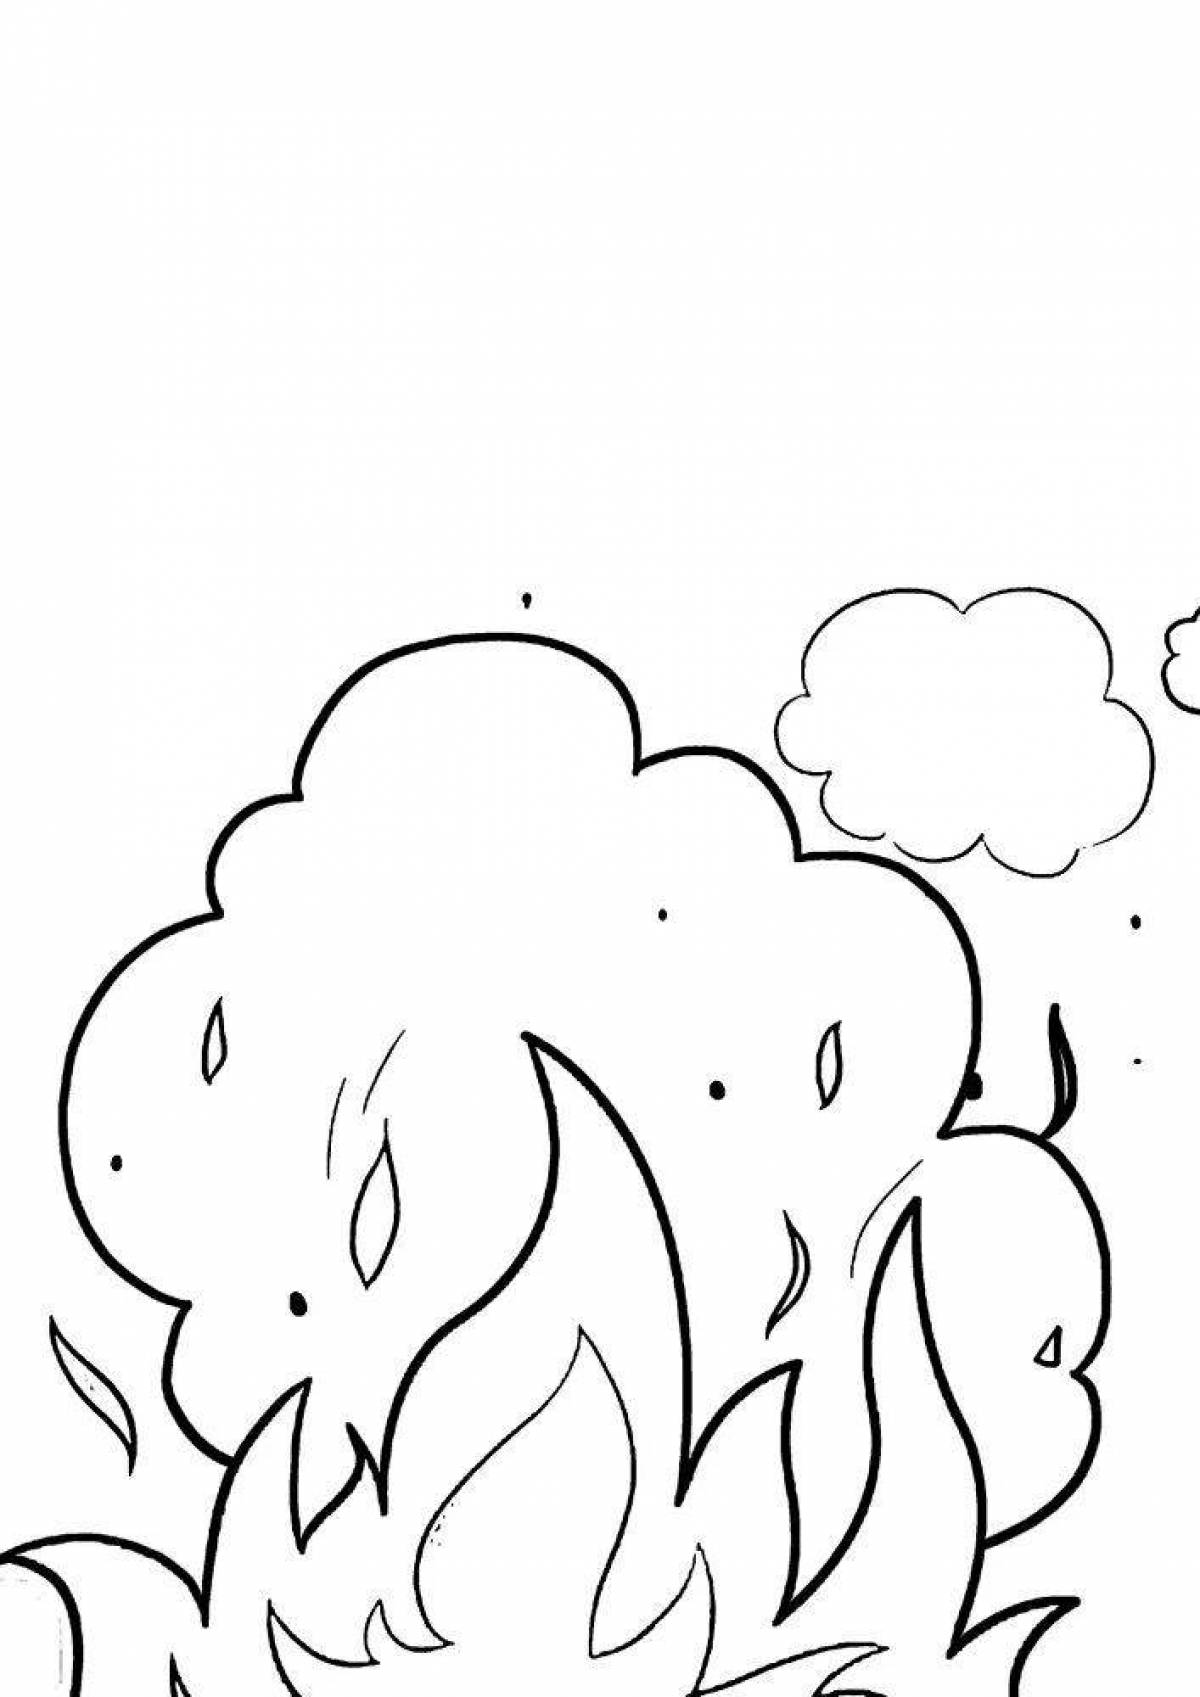 Mysterious smoke coloring page